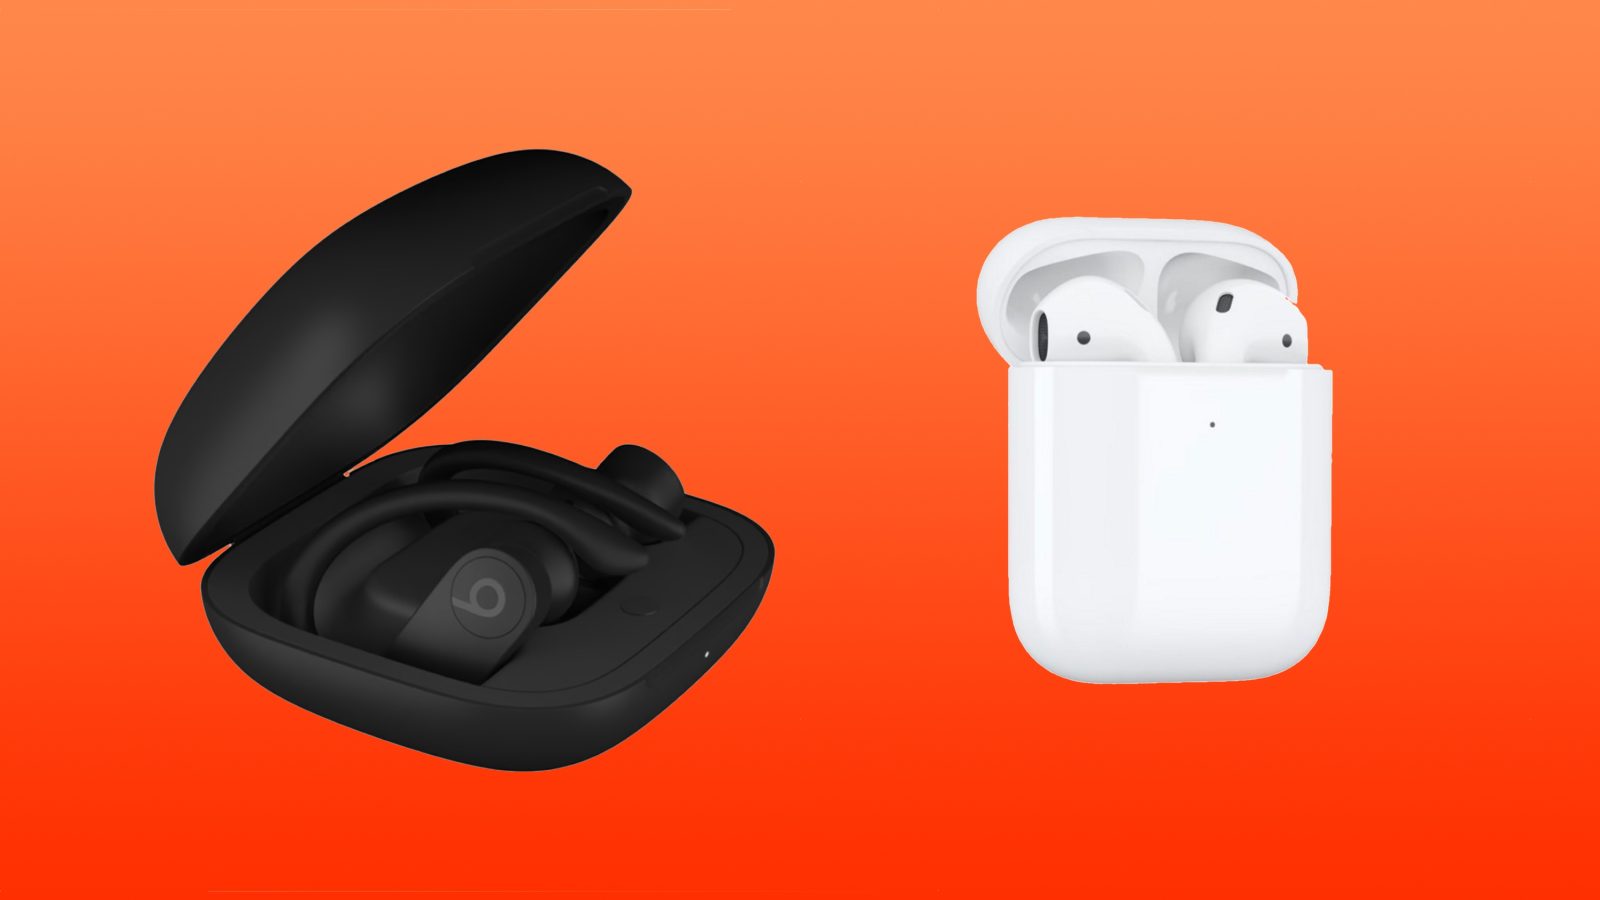 Should buy AirPods or Powerbeats Pro? Here's how Apple's truly wireless earbuds - 9to5Mac